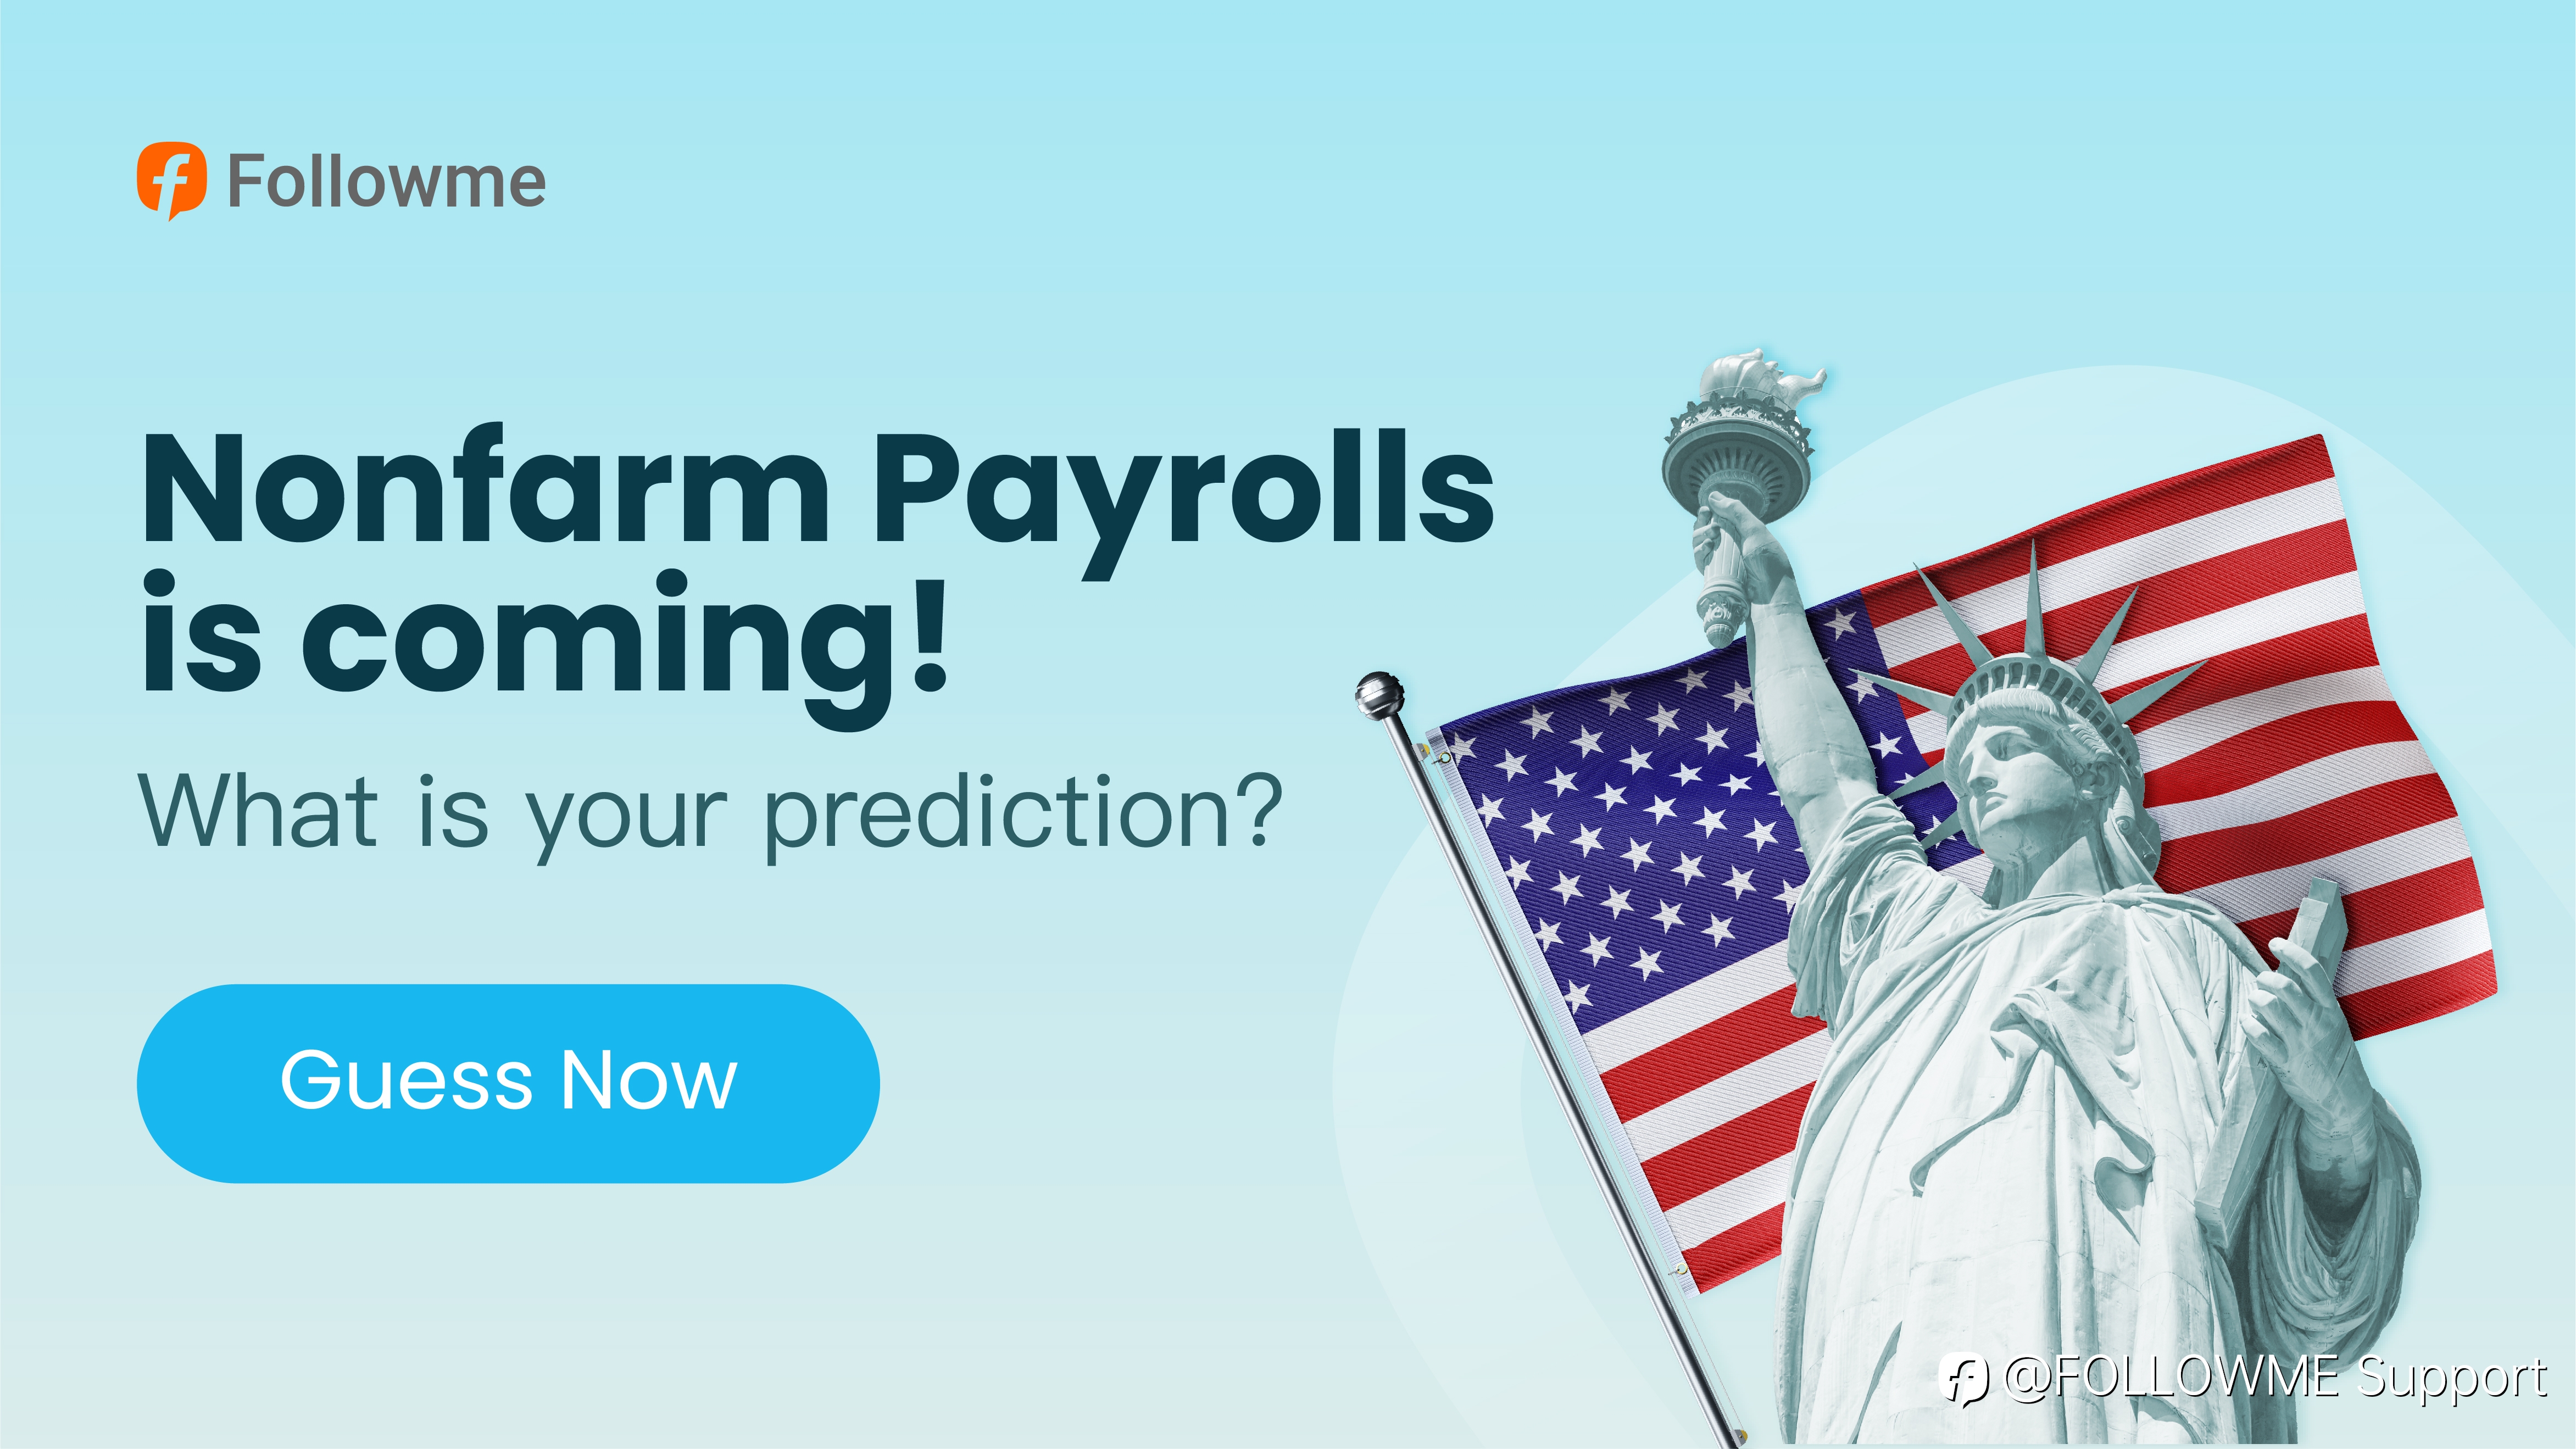 Nonfarm Payrolls is coming, get 50 FCOIN with your prediction!